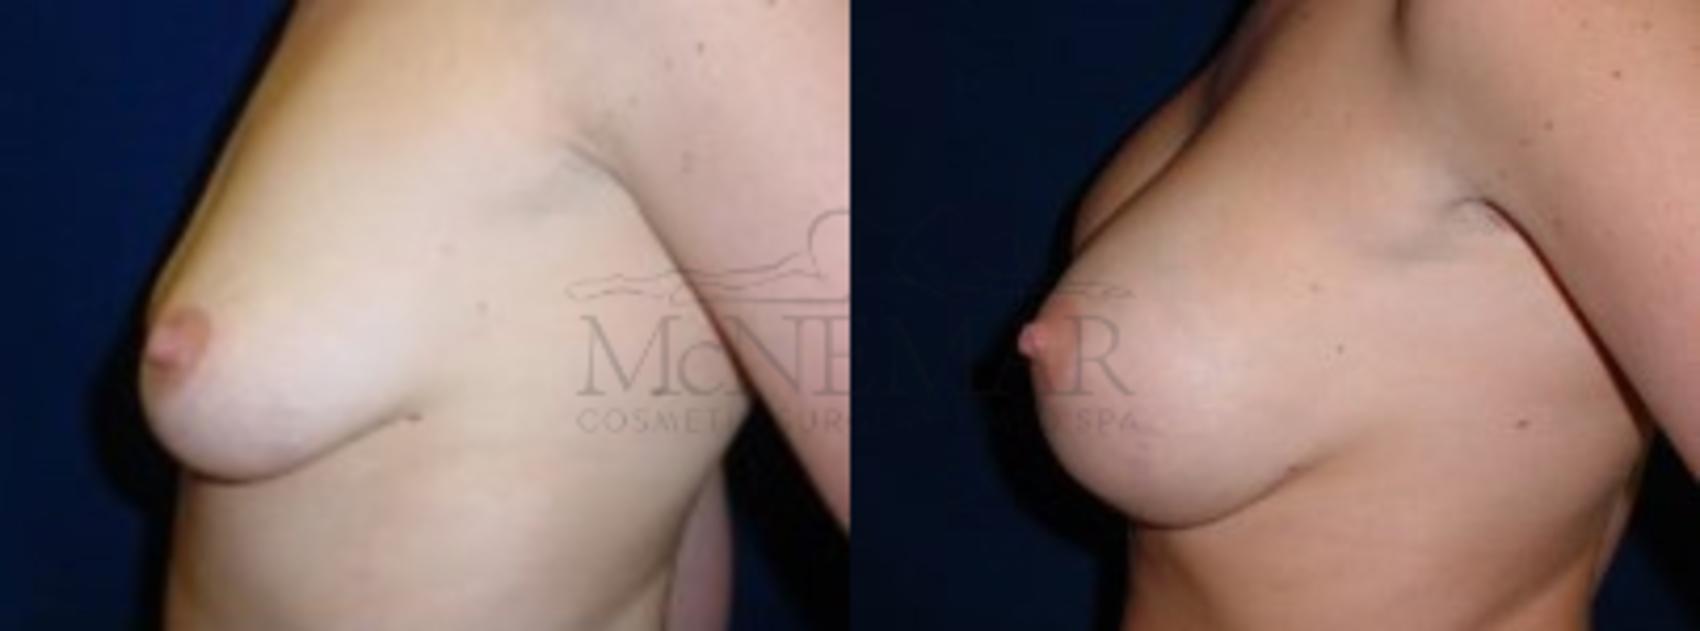 Breast Augmentation Case 1 Before & After View #2 | San Ramon & Tracy, CA | McNemar Cosmetic Surgery